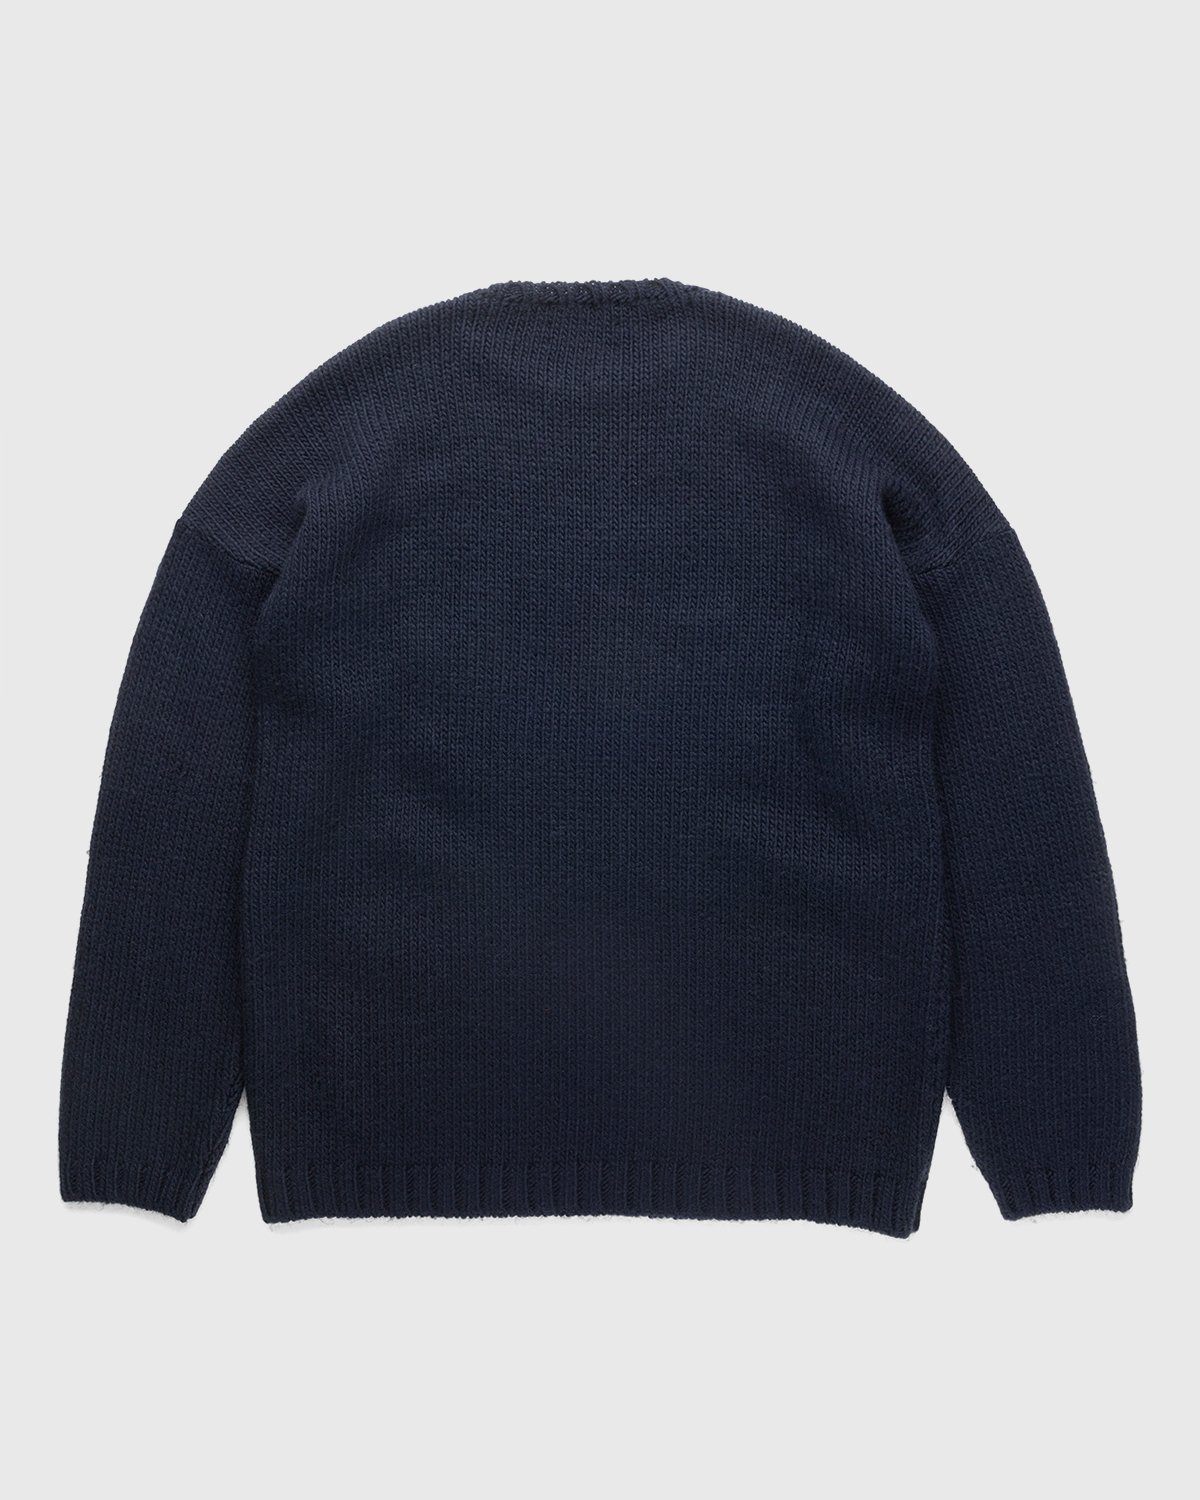 Our Legacy - Popover Roundneck Lucky Clover Navy - Clothing - Black - Image 2